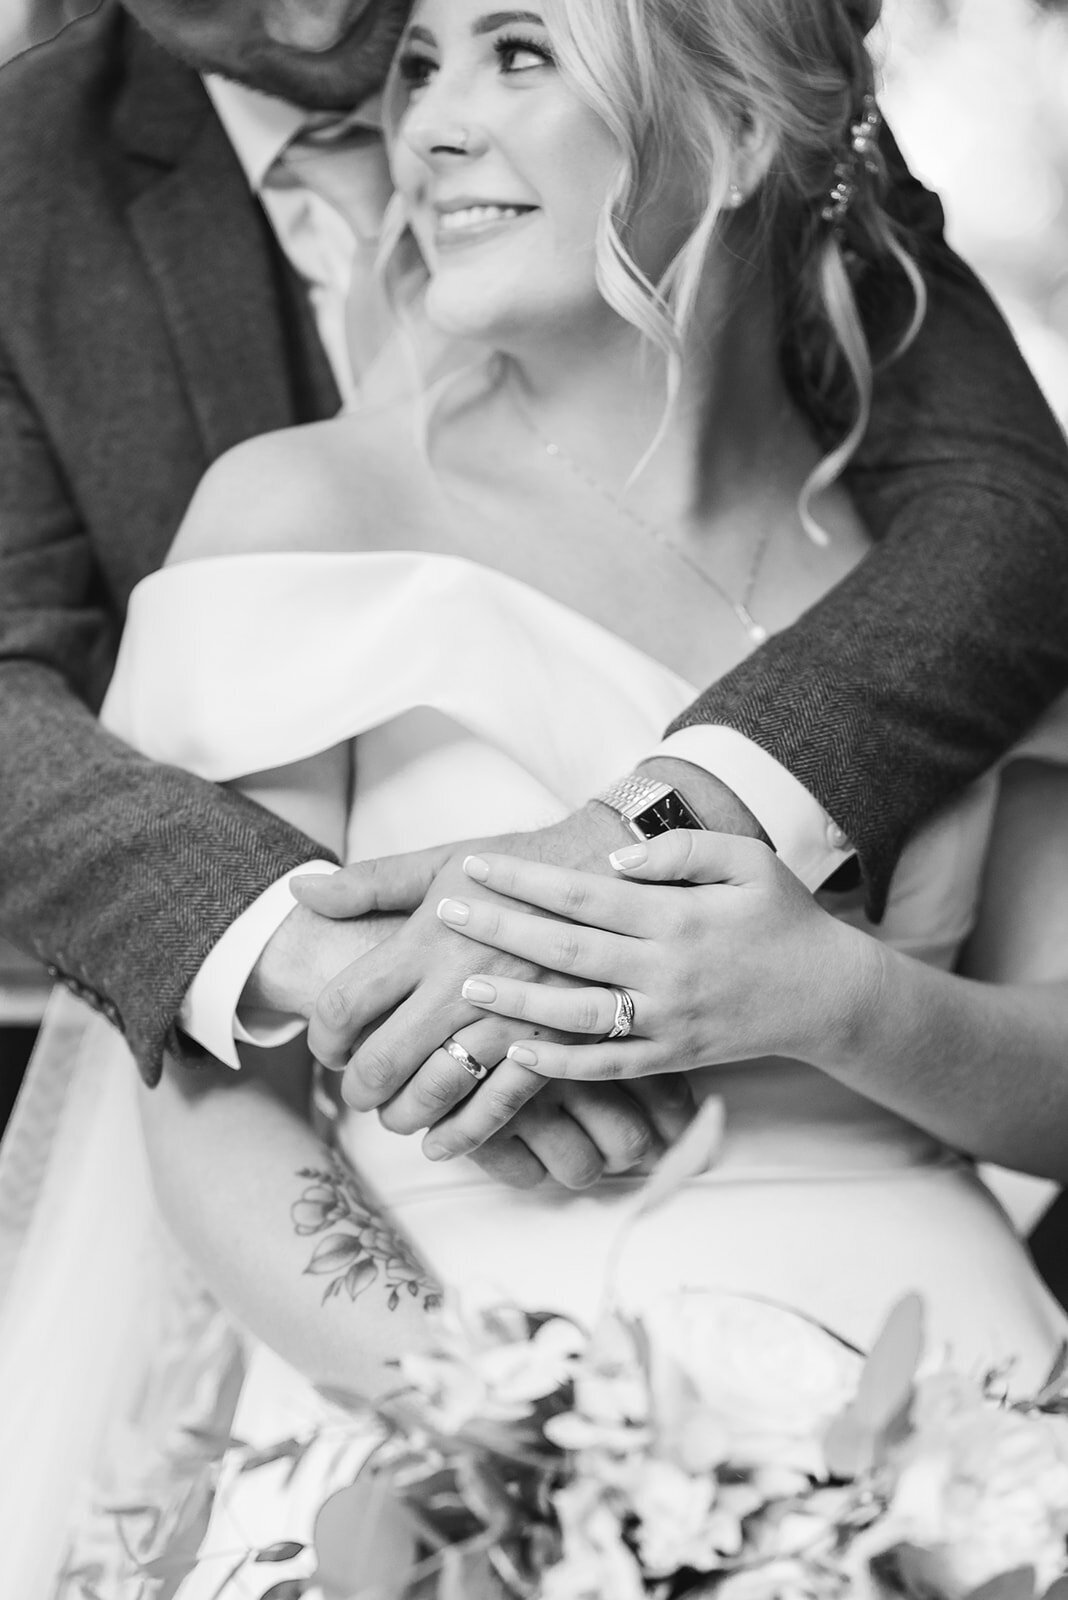 Black and white image of a bride and grooms hands, focusing on their rings. The groom is behind the bride and has his arms around the brides shoulders. The brides hand is placed gently on top of the grooms hand.